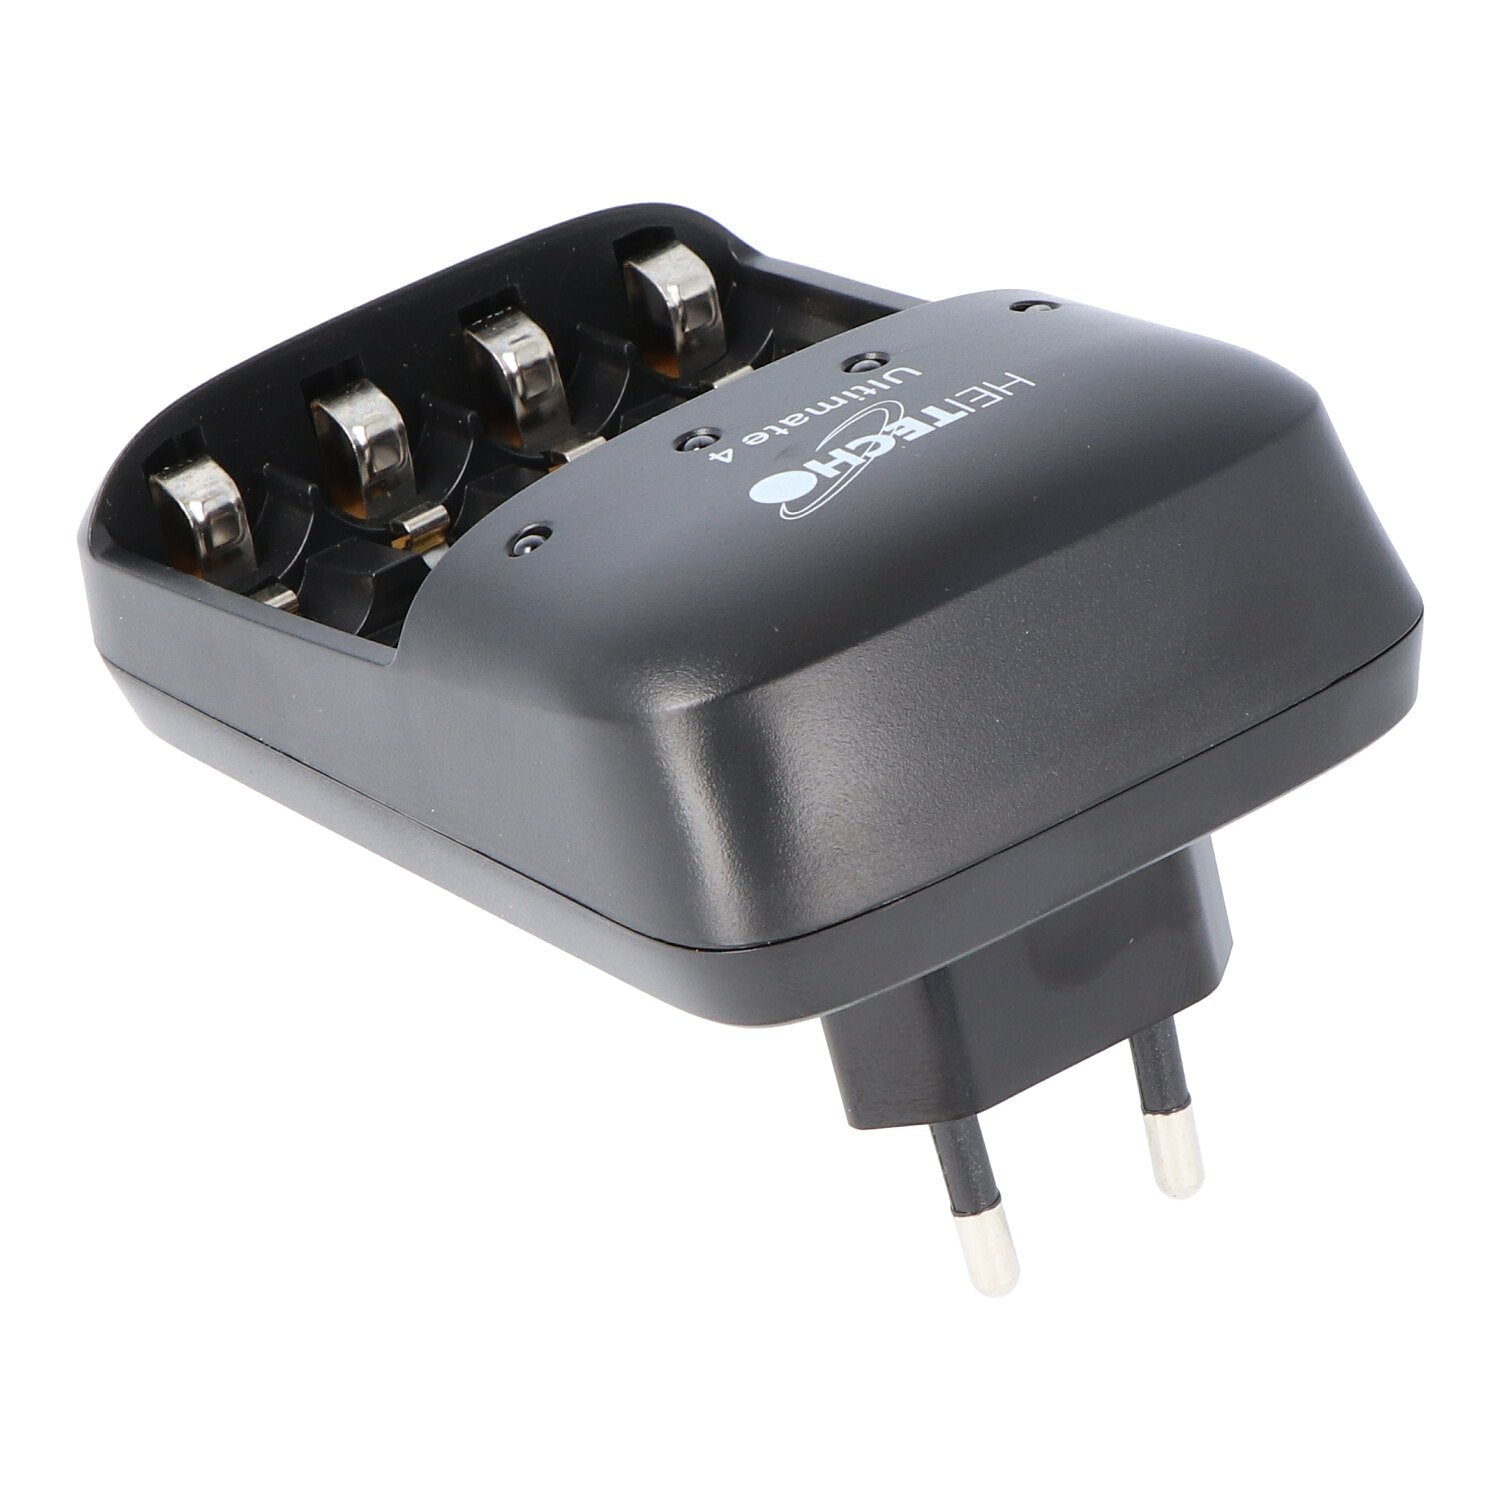 Plug-fast charger Ultimate 4 with individual bay monitoring, trickle charging and battery defect det